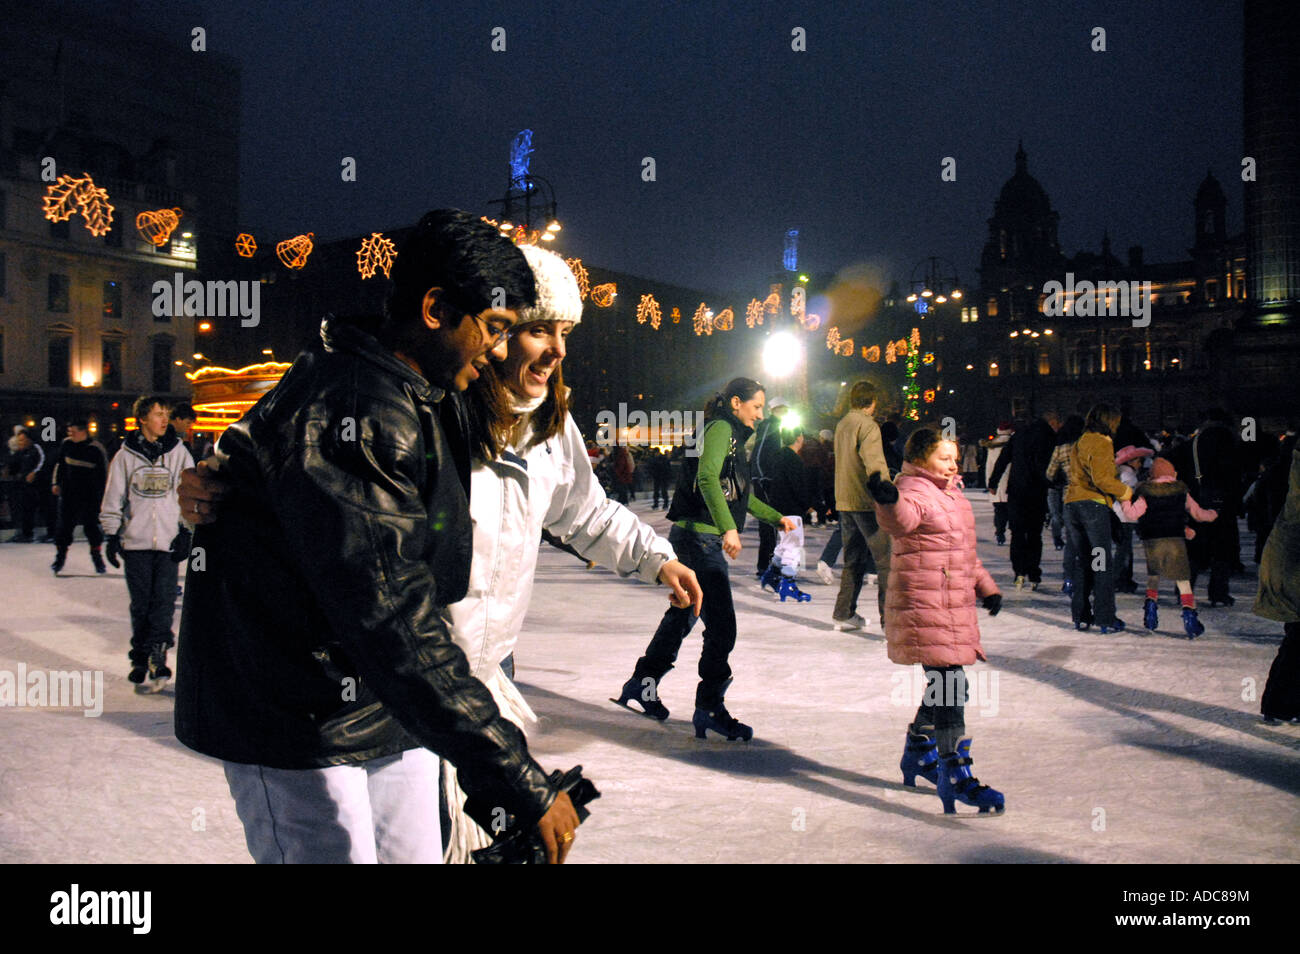 Ice Skating on Outdoor Ice Rink, Square. City Chambers in